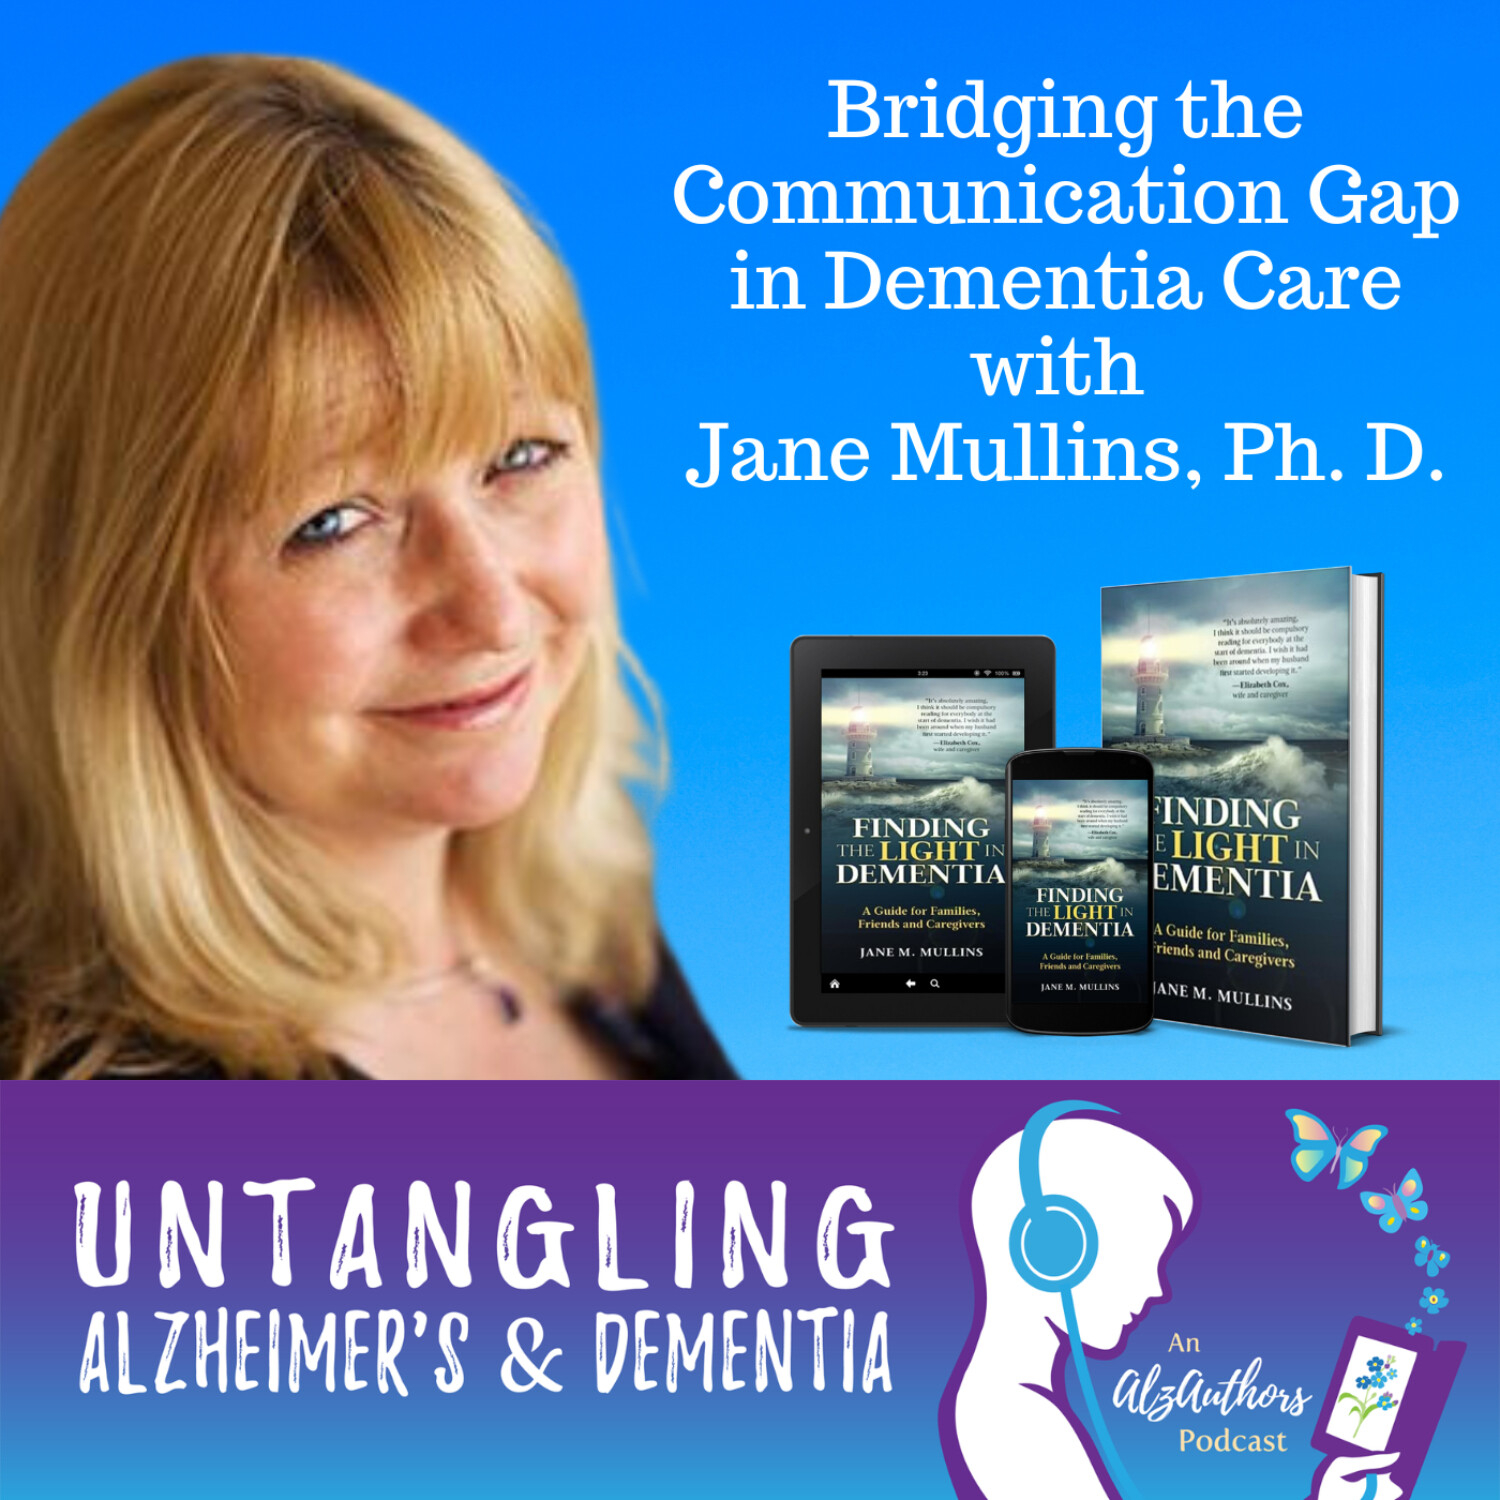 Bridging the Communication Gap in Dementia Care with Jane Mullins, Ph.D.